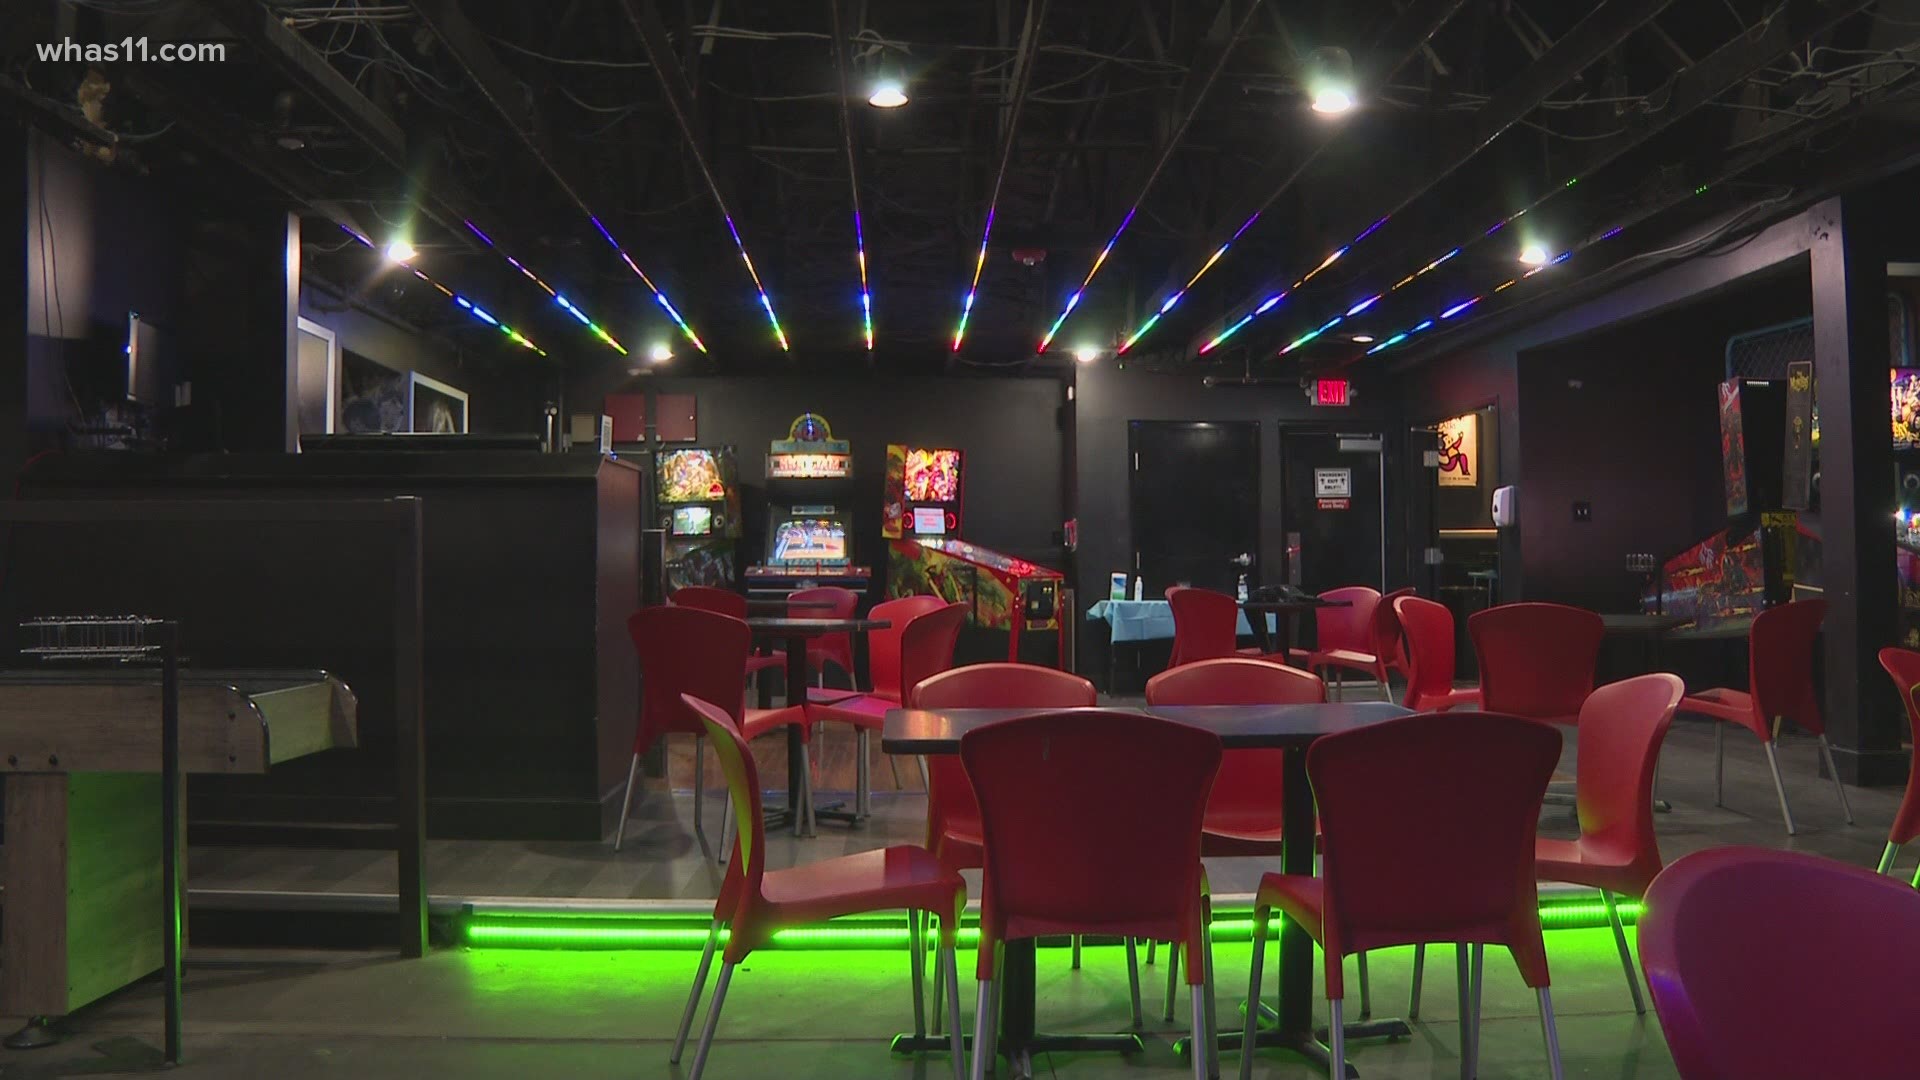 For the first time in close to a year, the popular Louisville bar, has sold tables instead of tickets to customers to see a live, indoor concert.